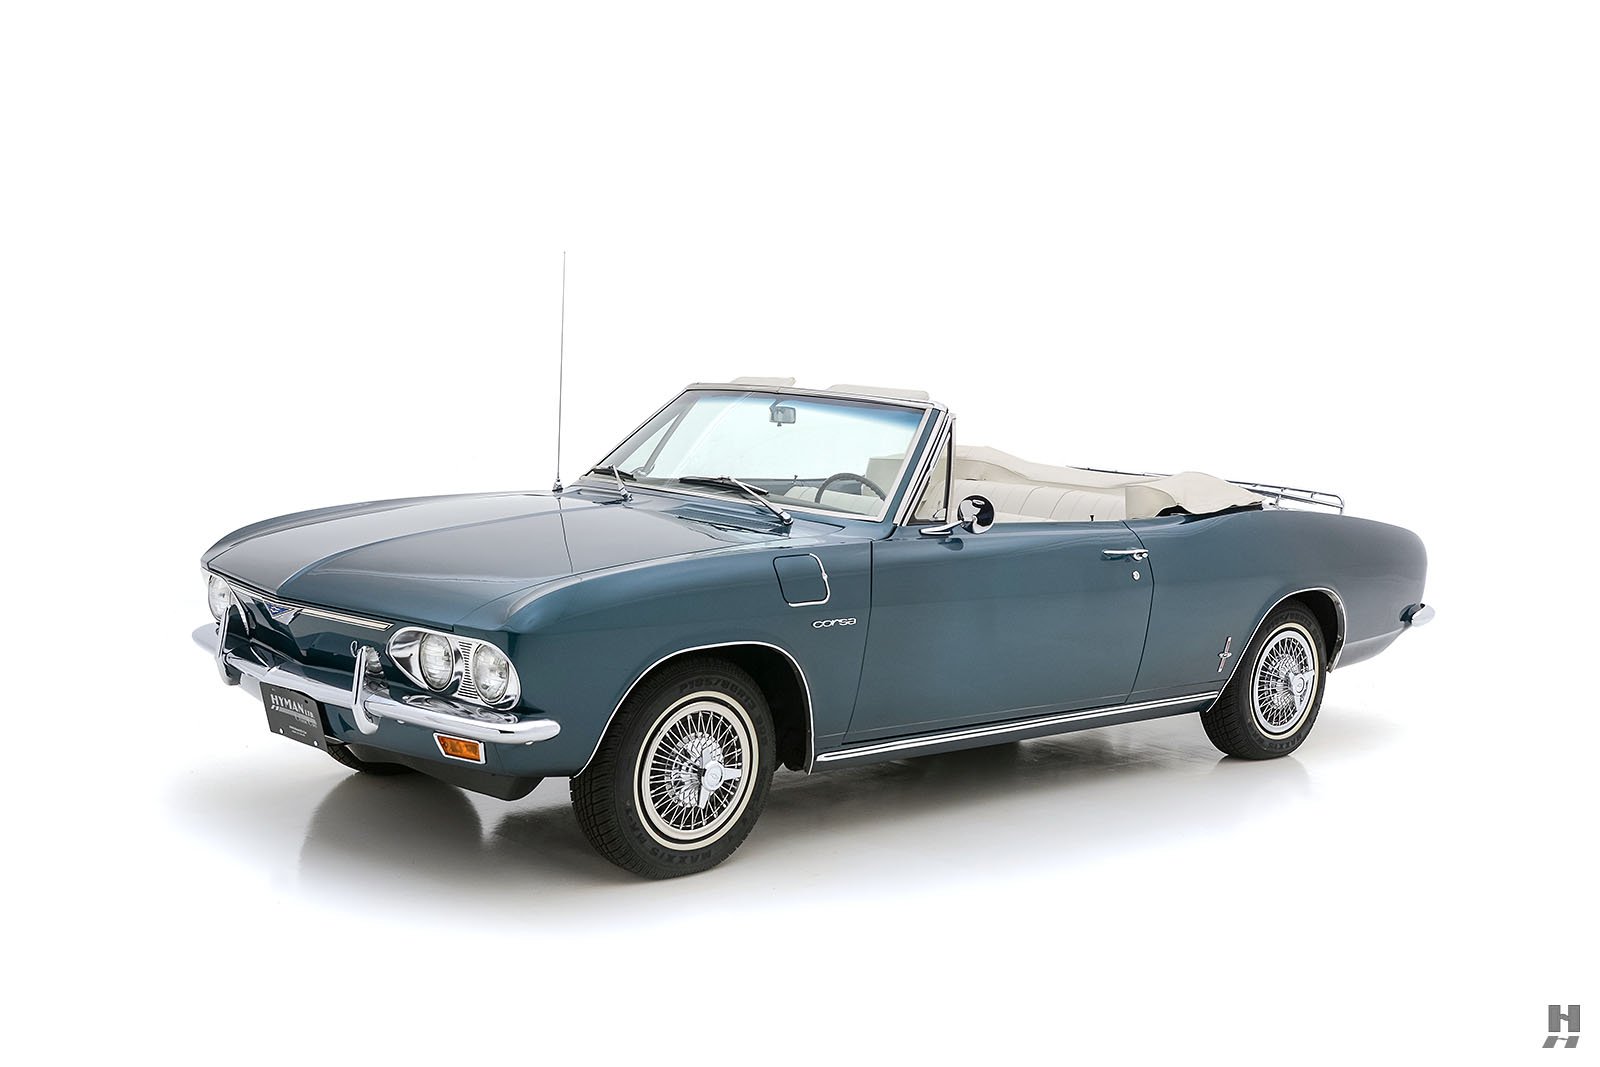 1966 Chevrolet Corvair Corsa For Sale | Vintage Driving Machines